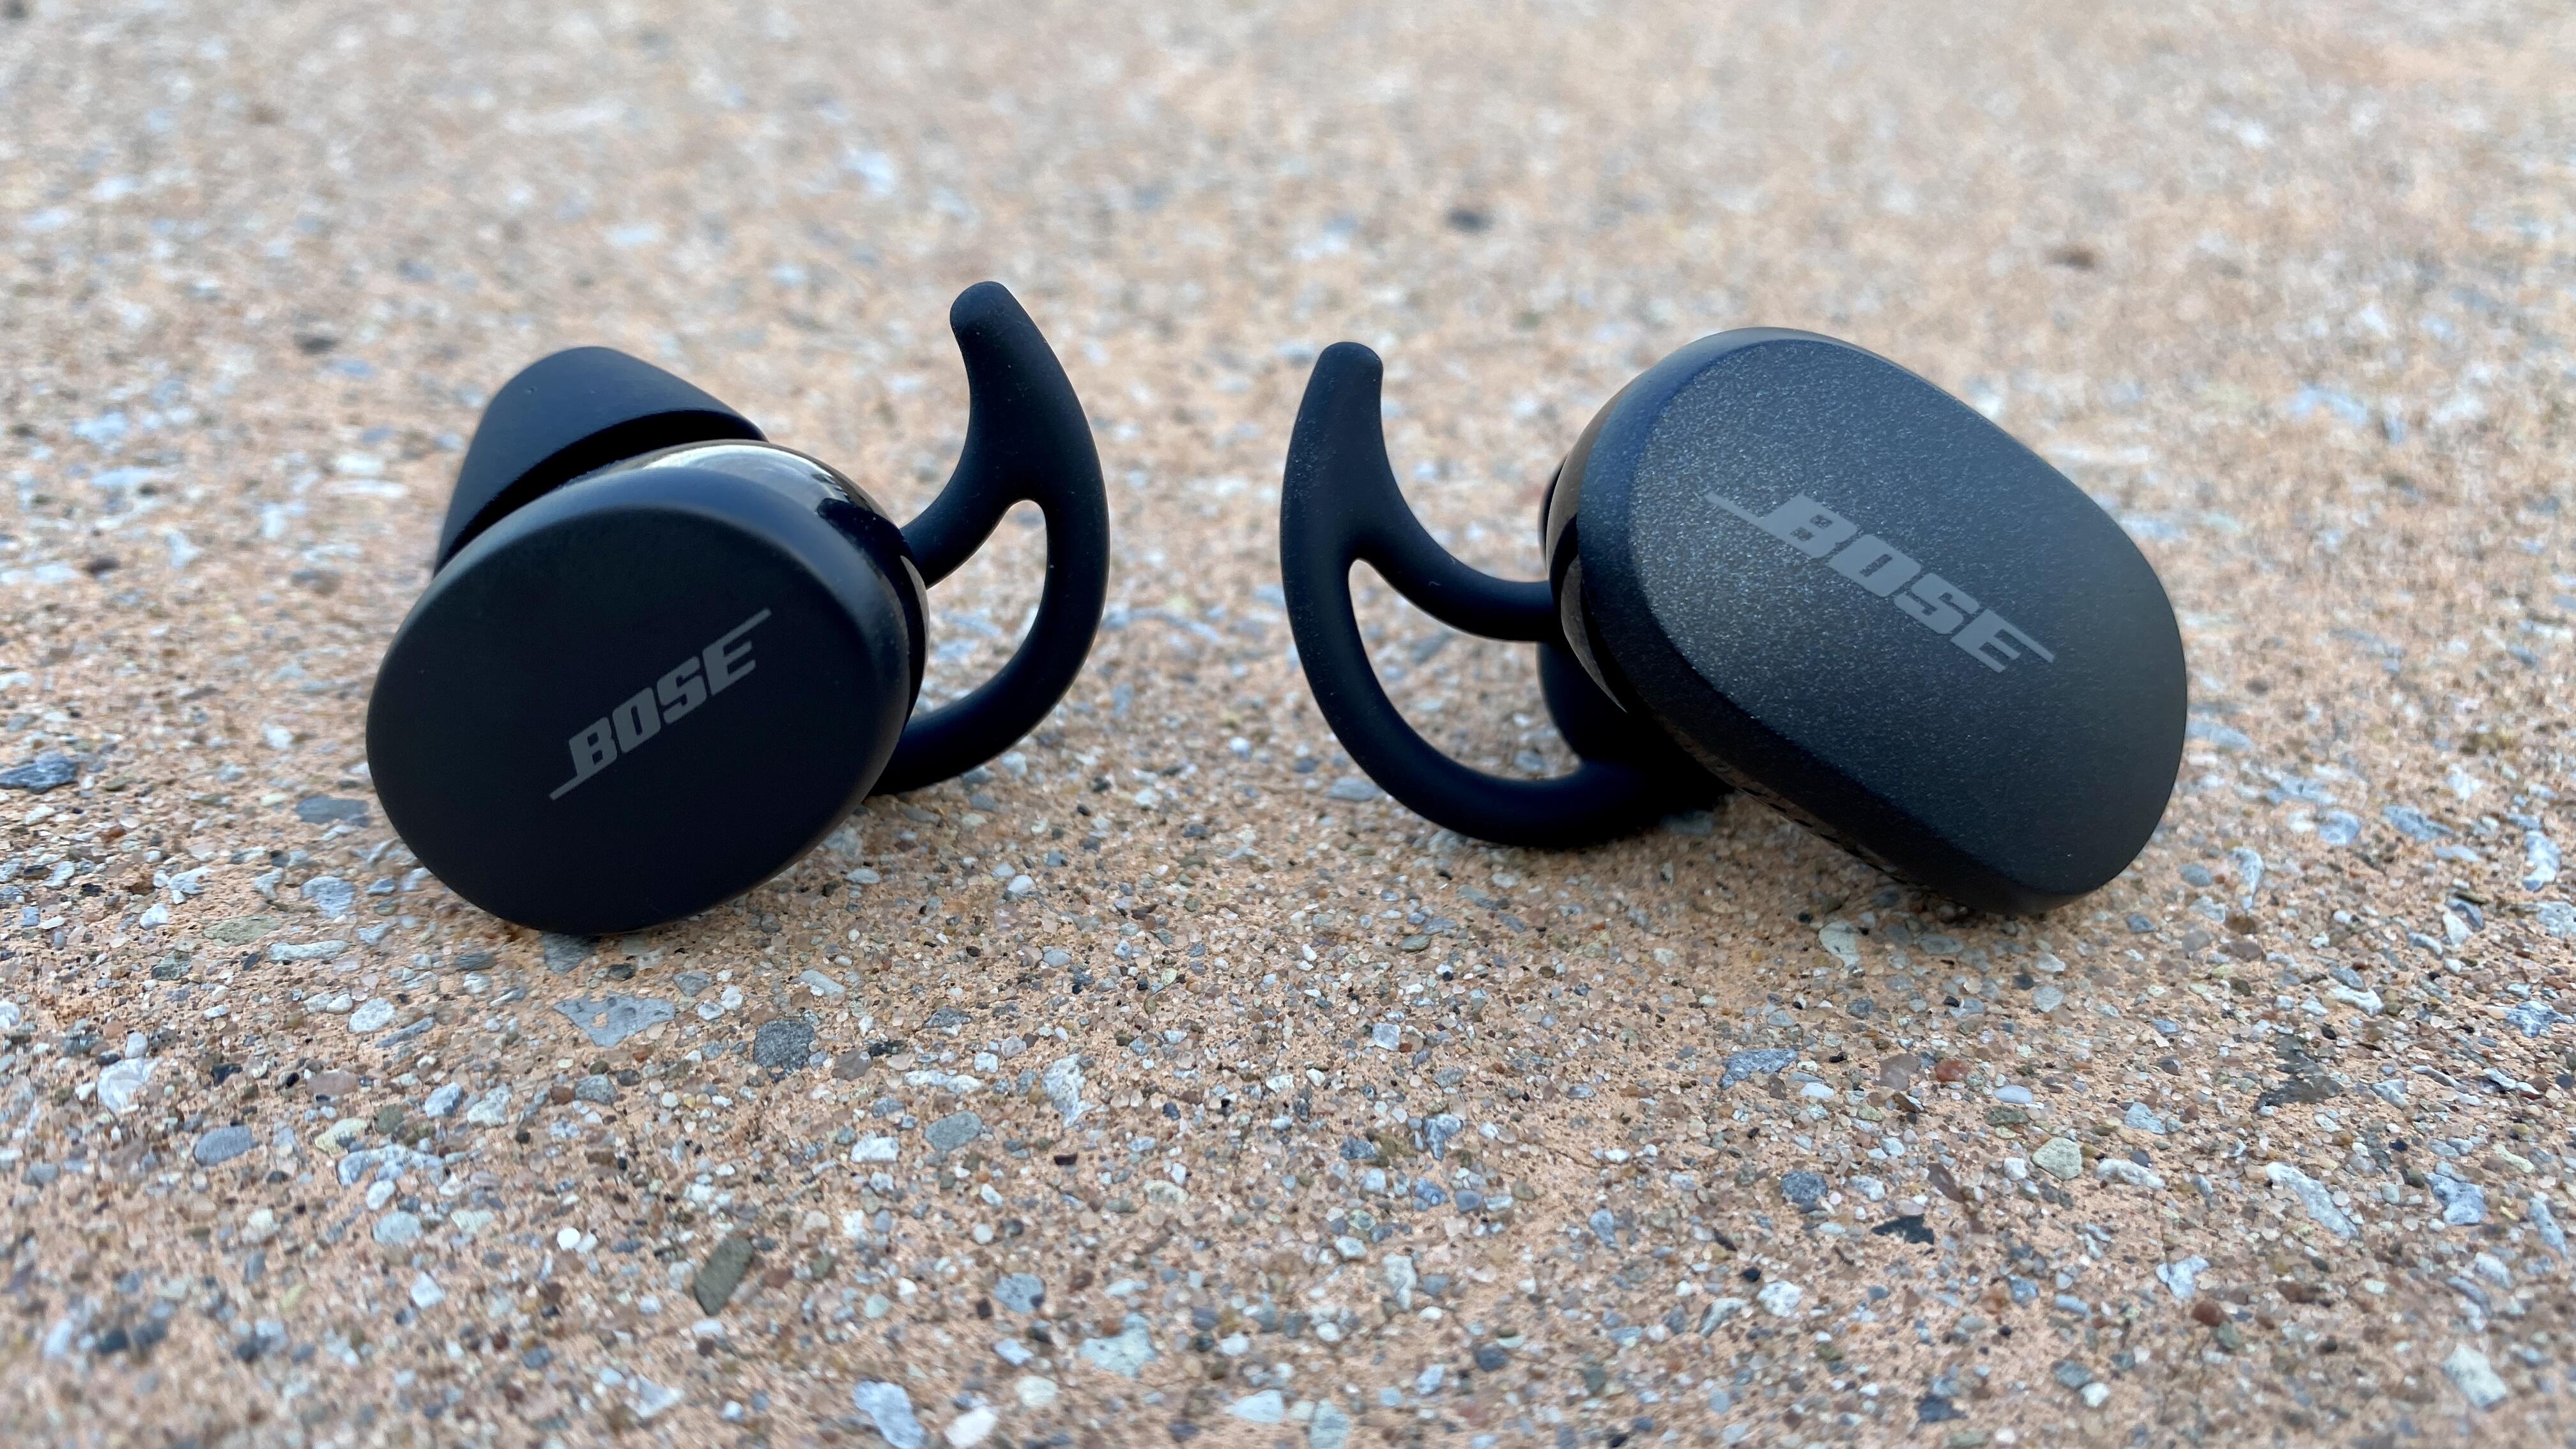 Bose QuietComfort Earbuds review: They 